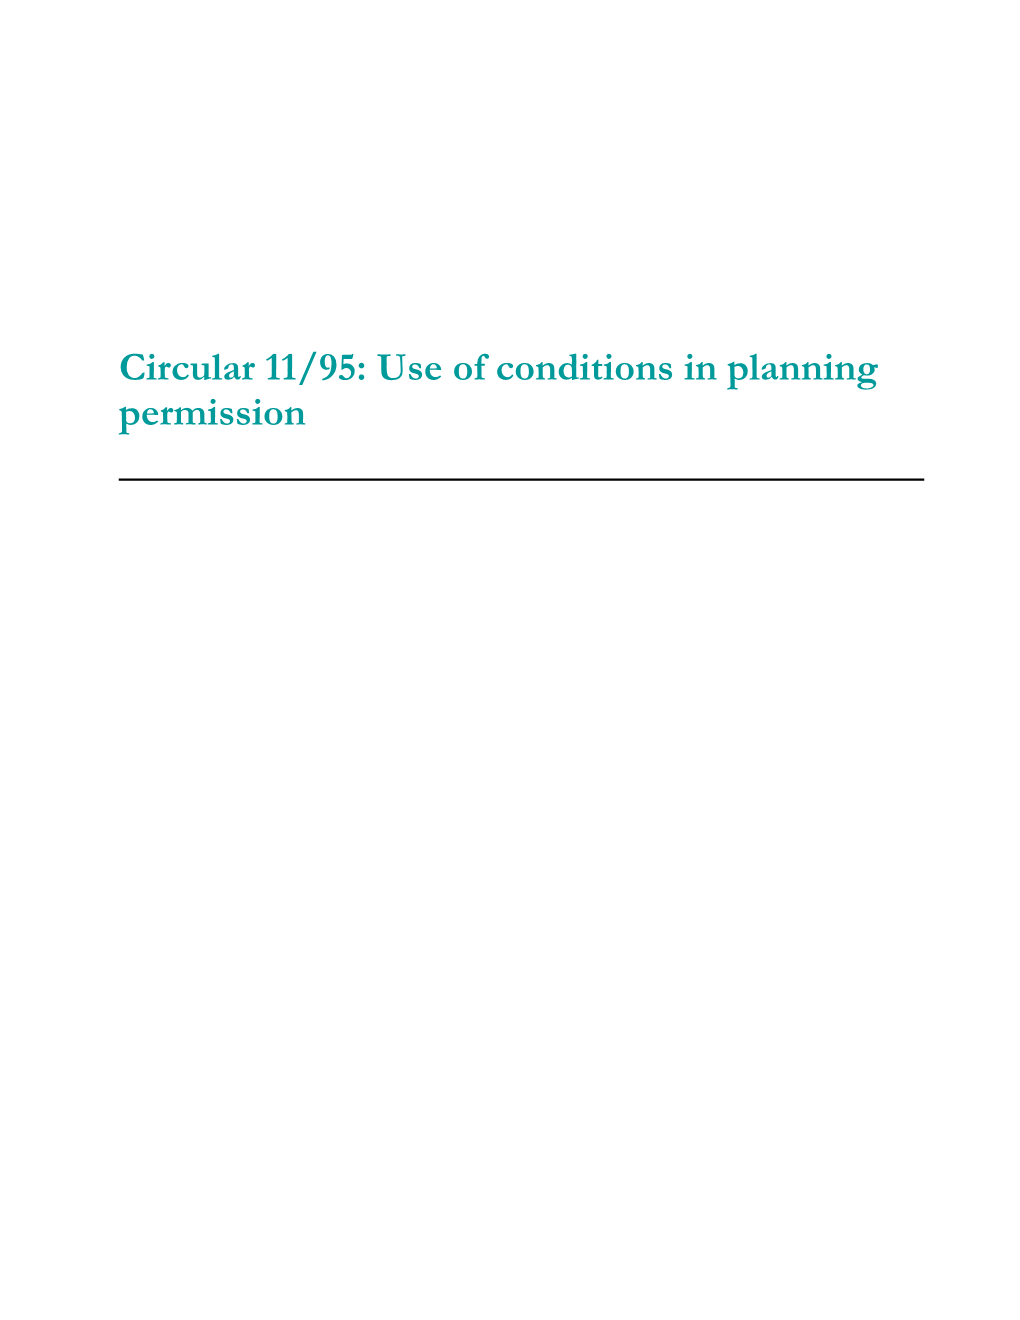 Circular 11/95: Use of Conditions in Planning Permission